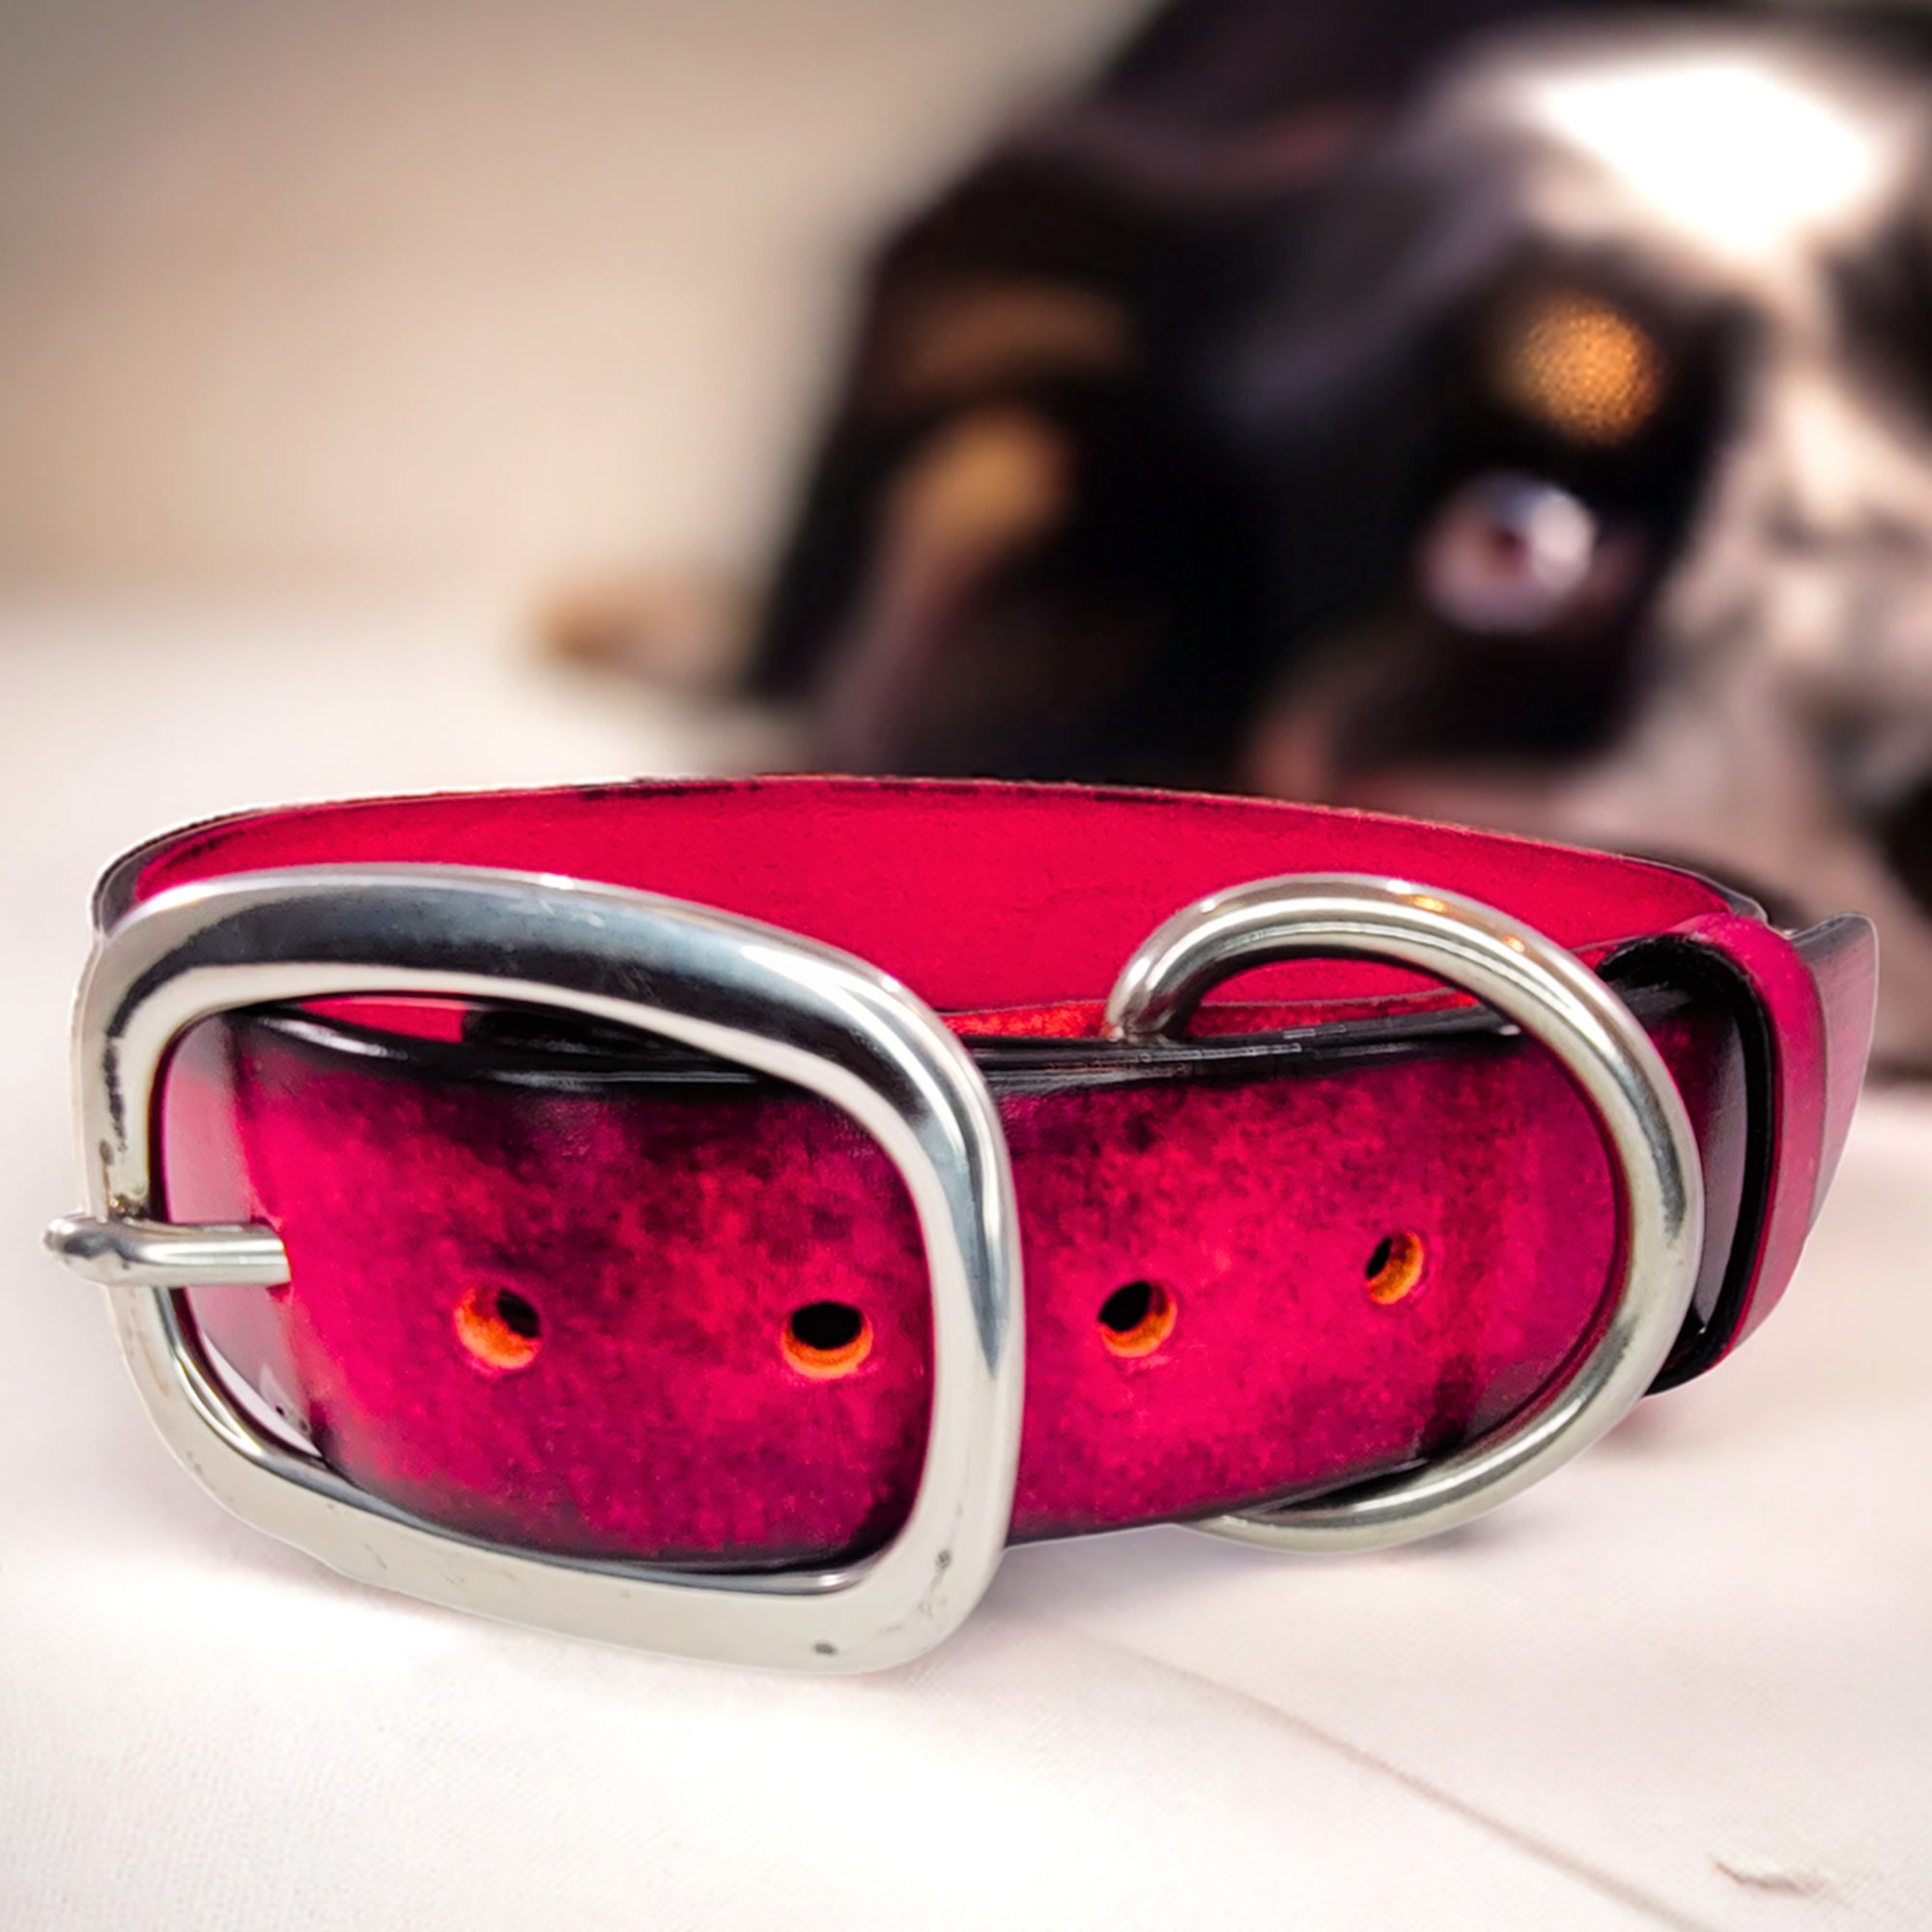 leather dog collar red with dog in the back by toe beans 2